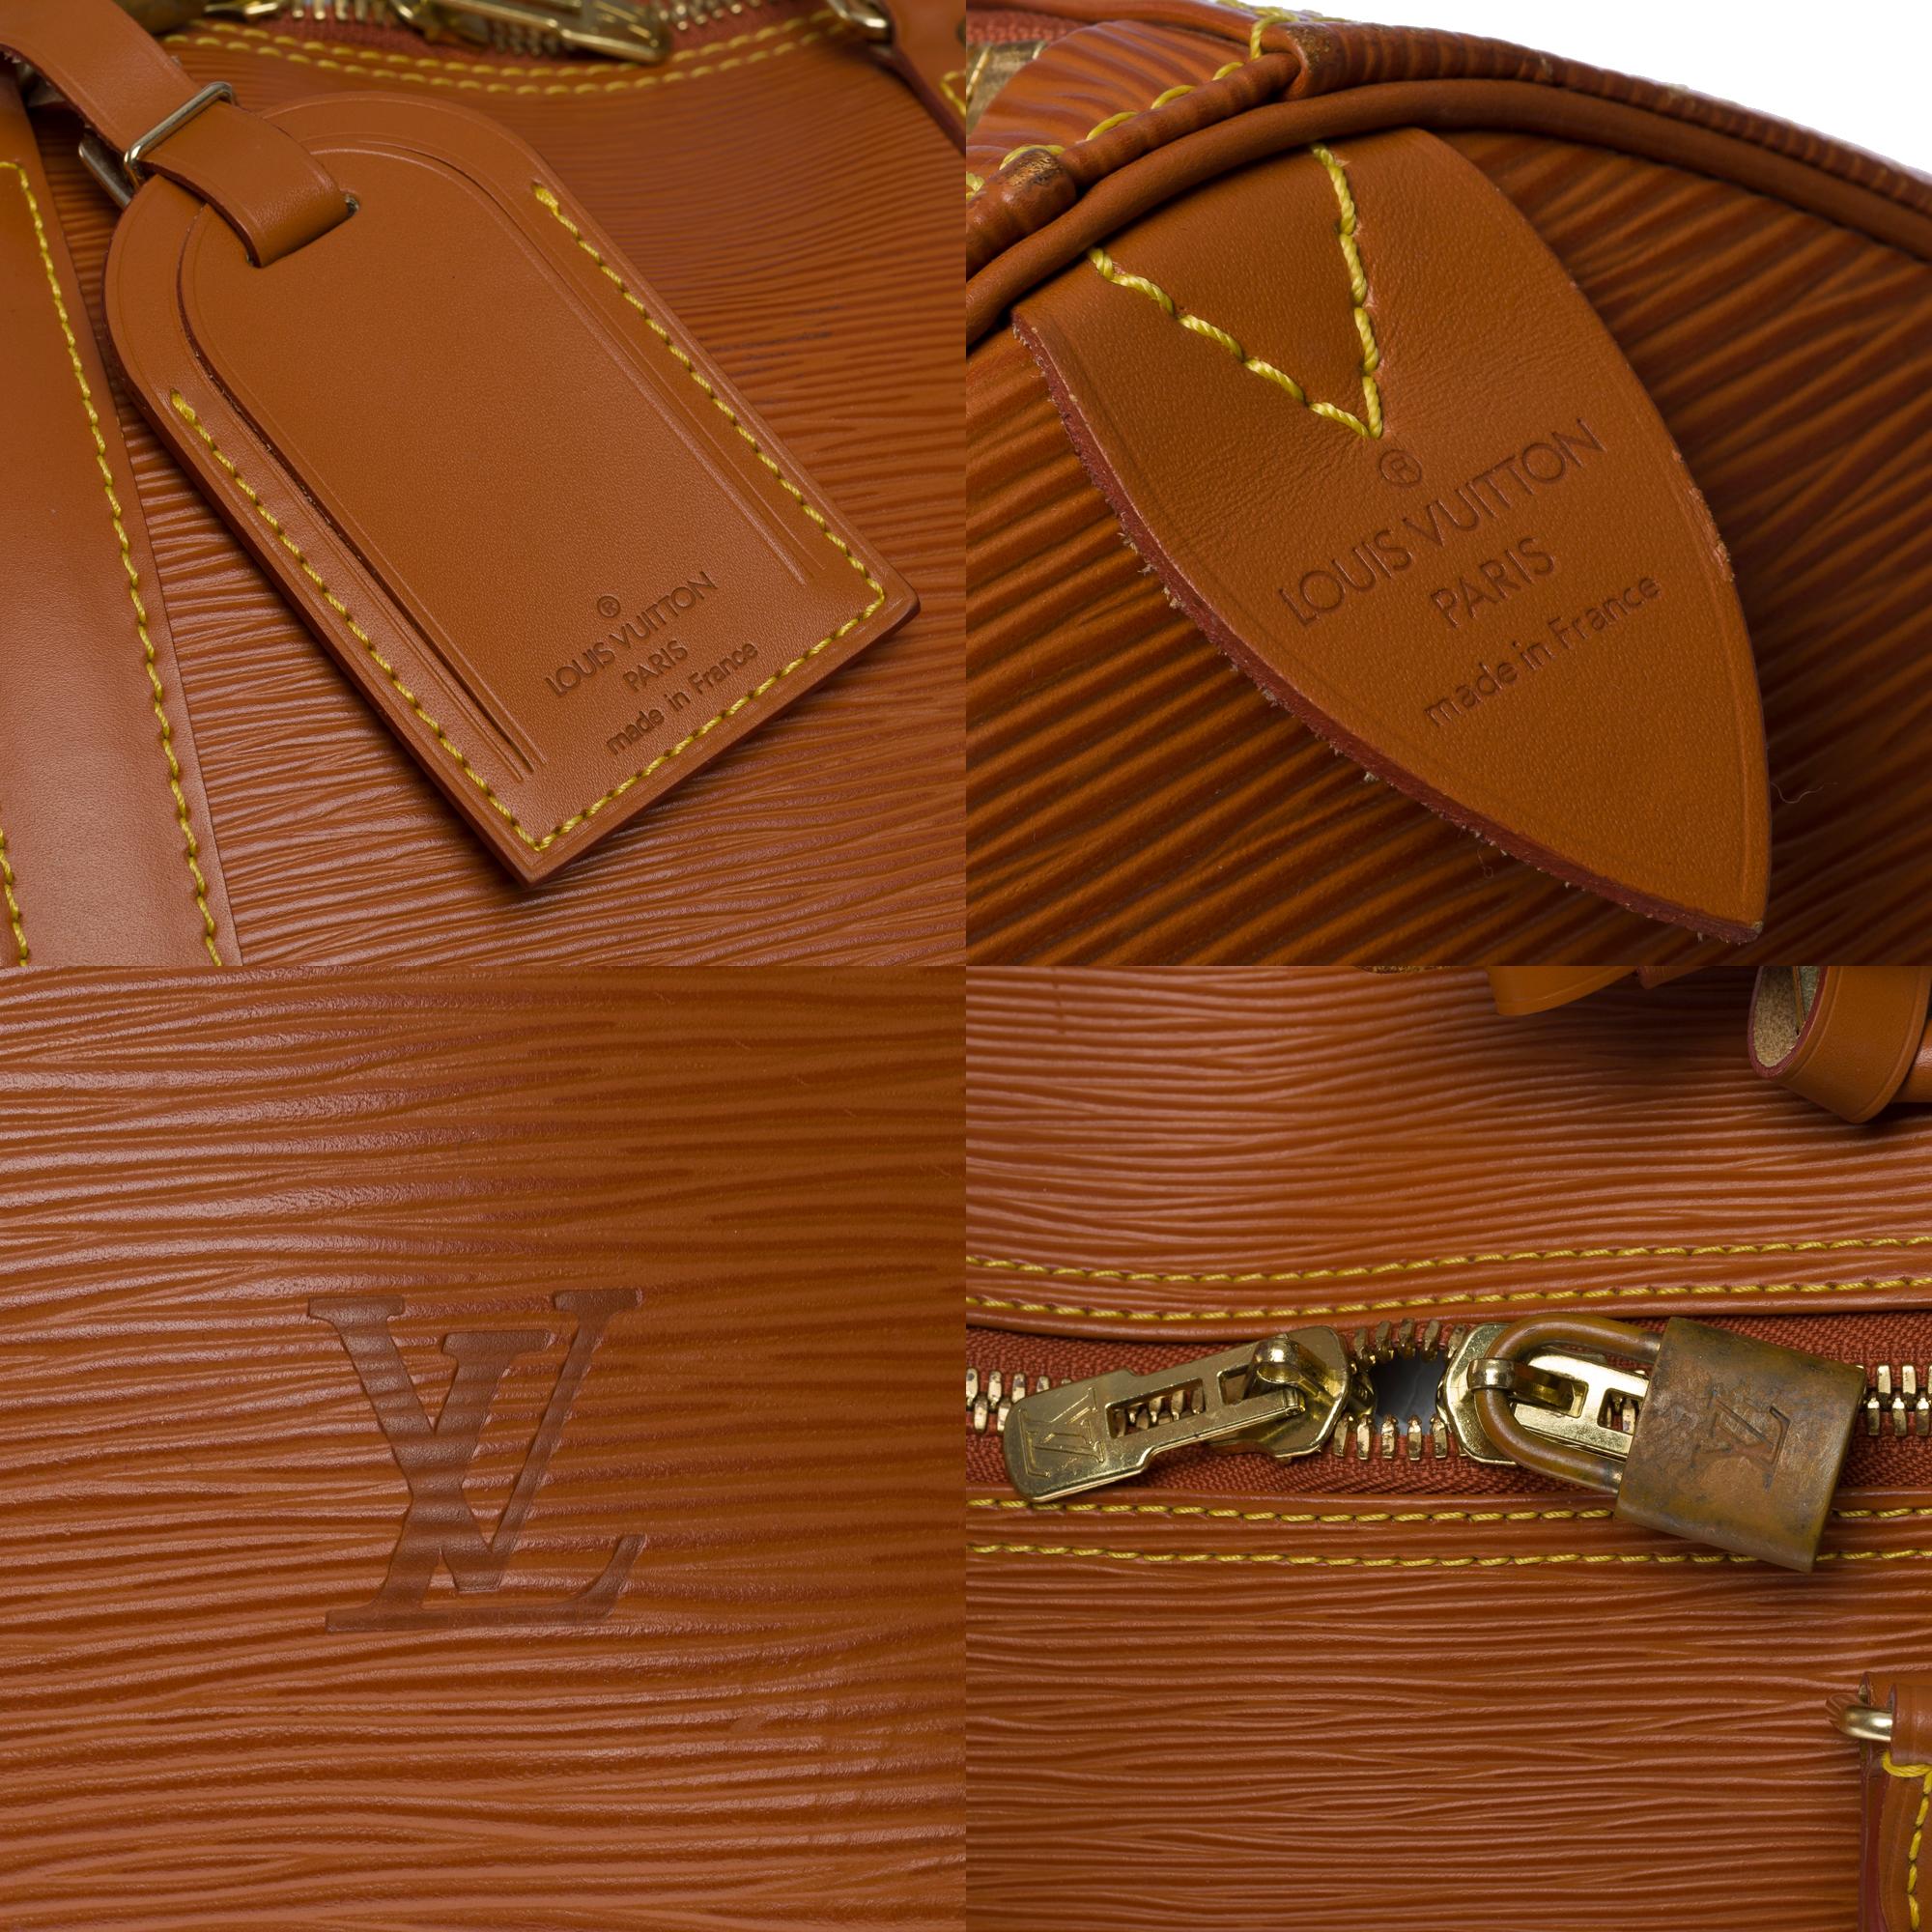 Louis Vuitton Keepall 50 Travel bag in Cognac epi leather, GHW 1